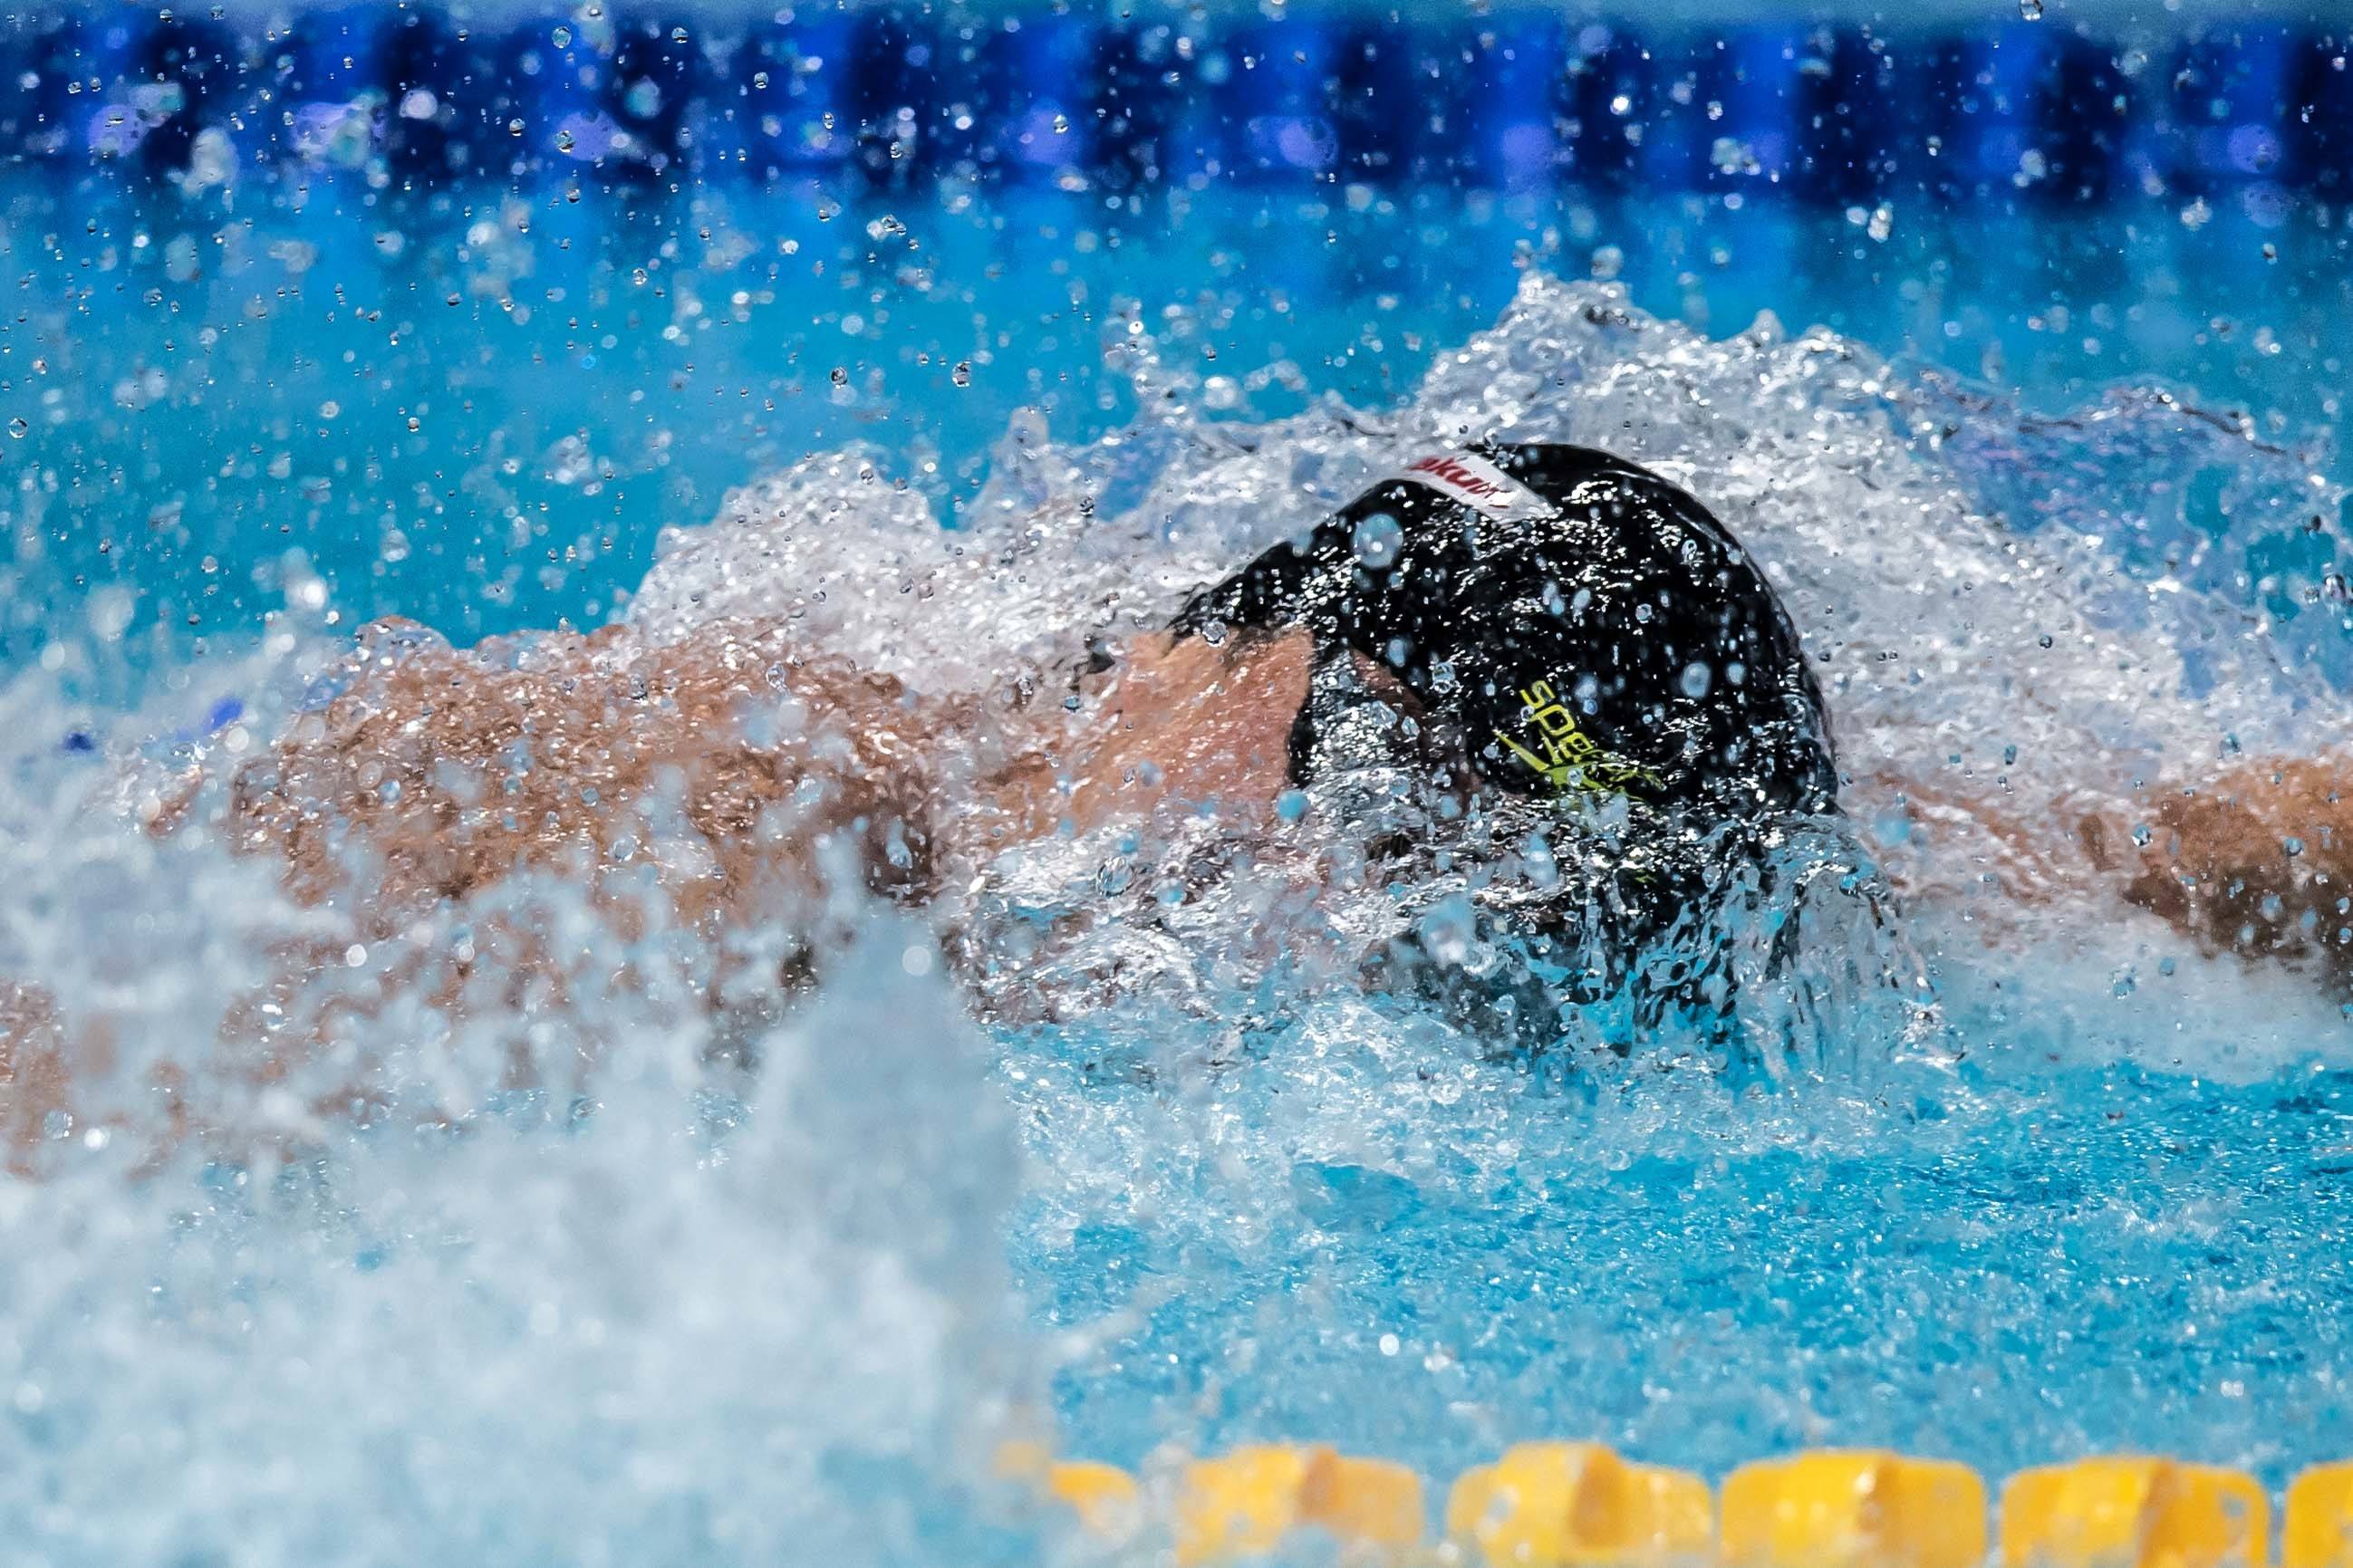 What to Do When You Are Getting Crushed by the Super Talented Swimmer